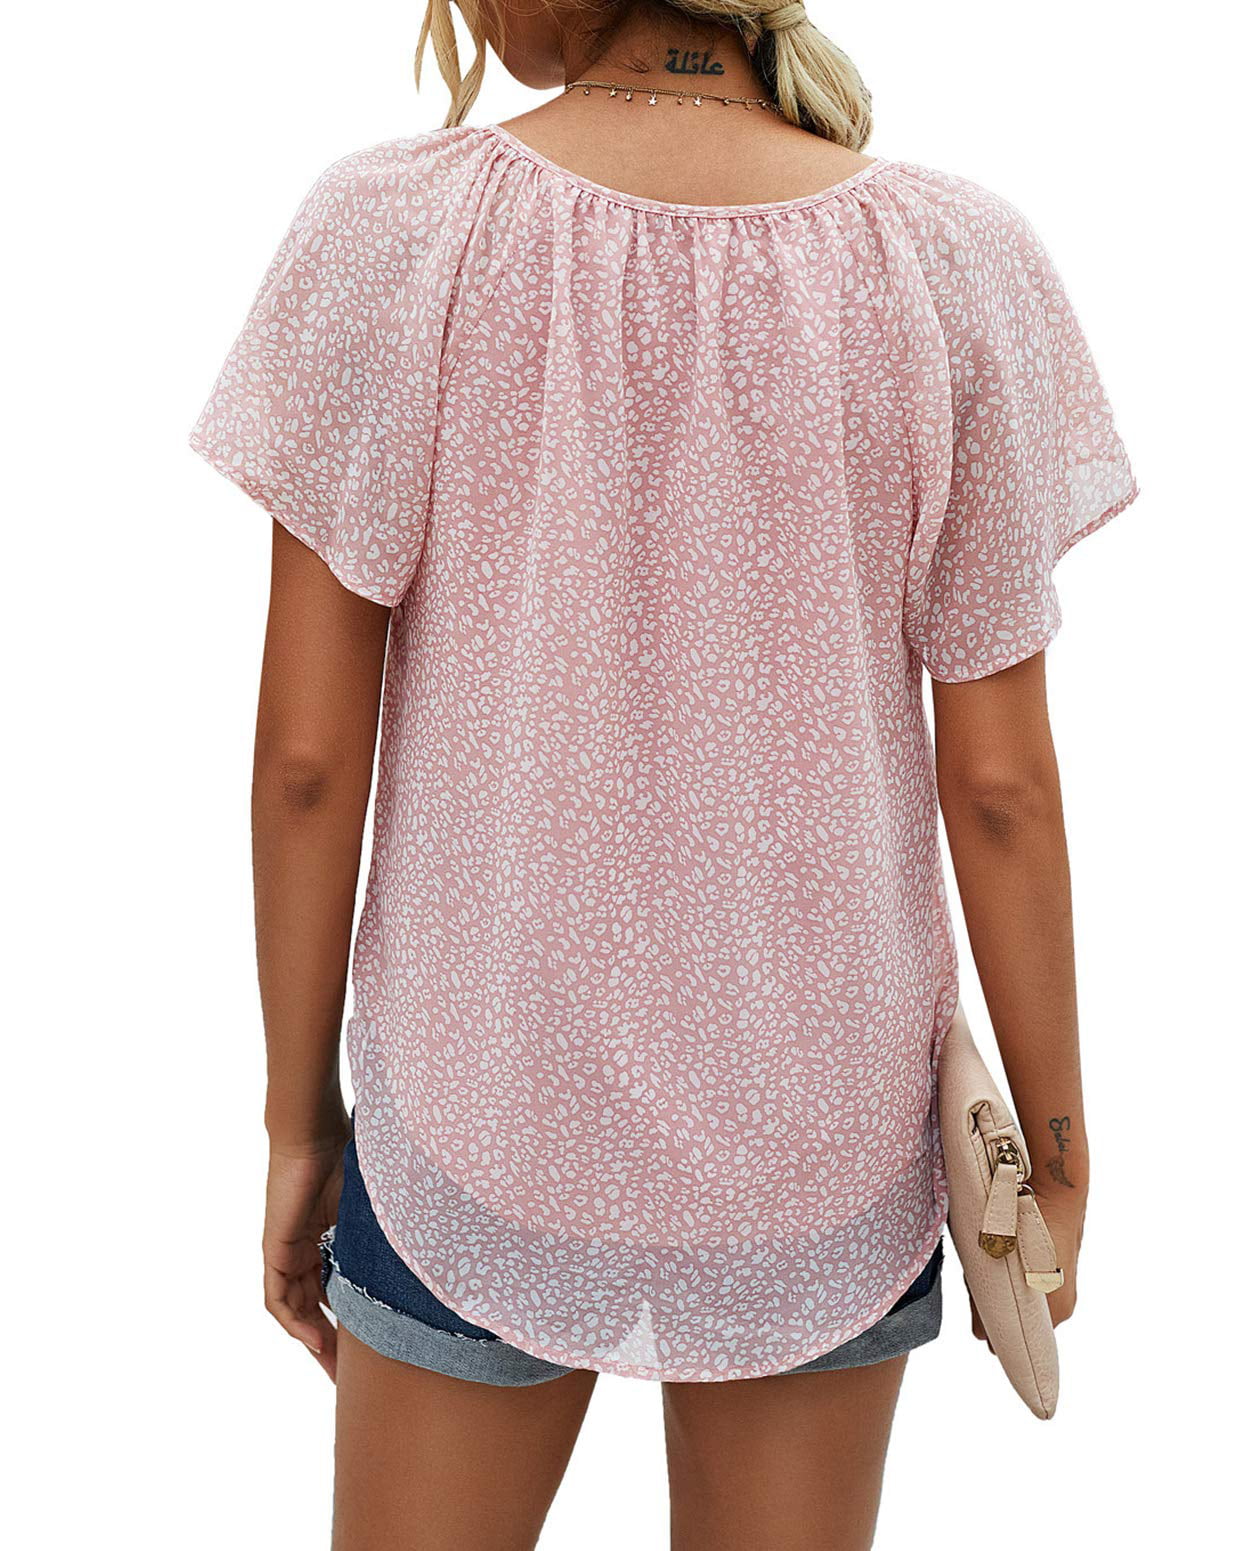 Fantaslook Blouses for Women Floral Print V Neck Ruffle Short Sleeve Shirts Casual Summer Tops - image 2 of 6